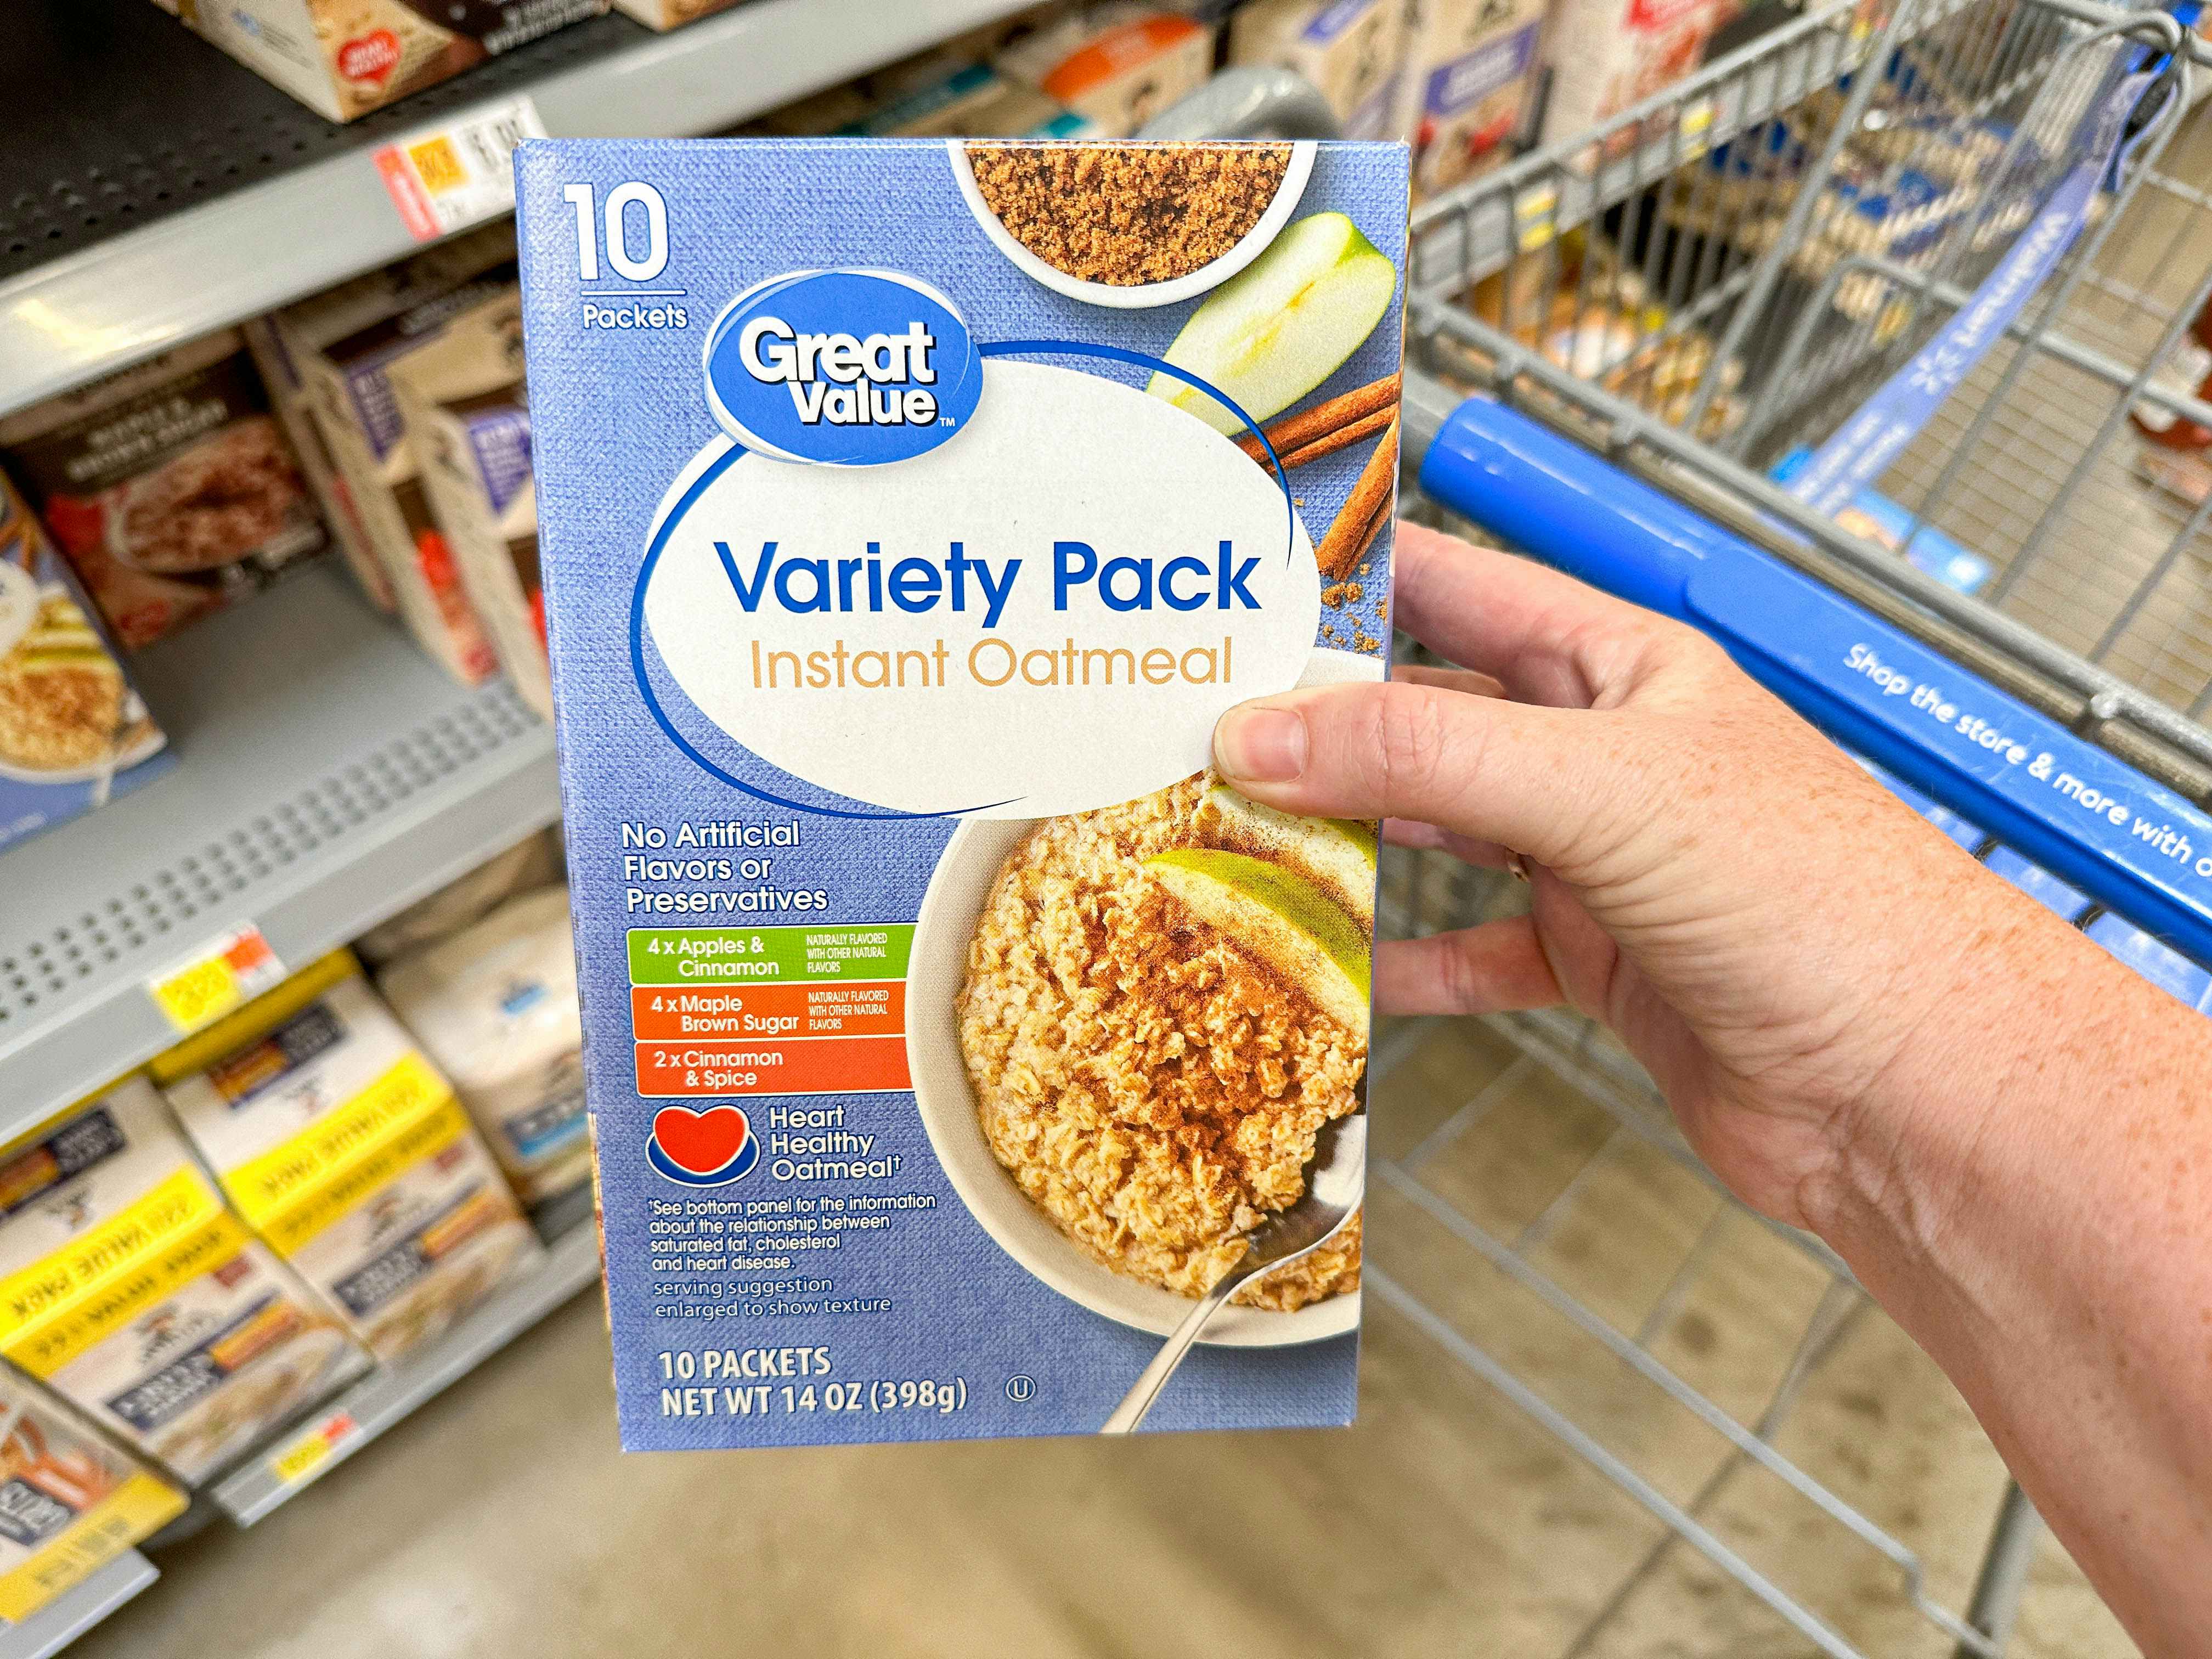 a package of oatmeal being held in store 